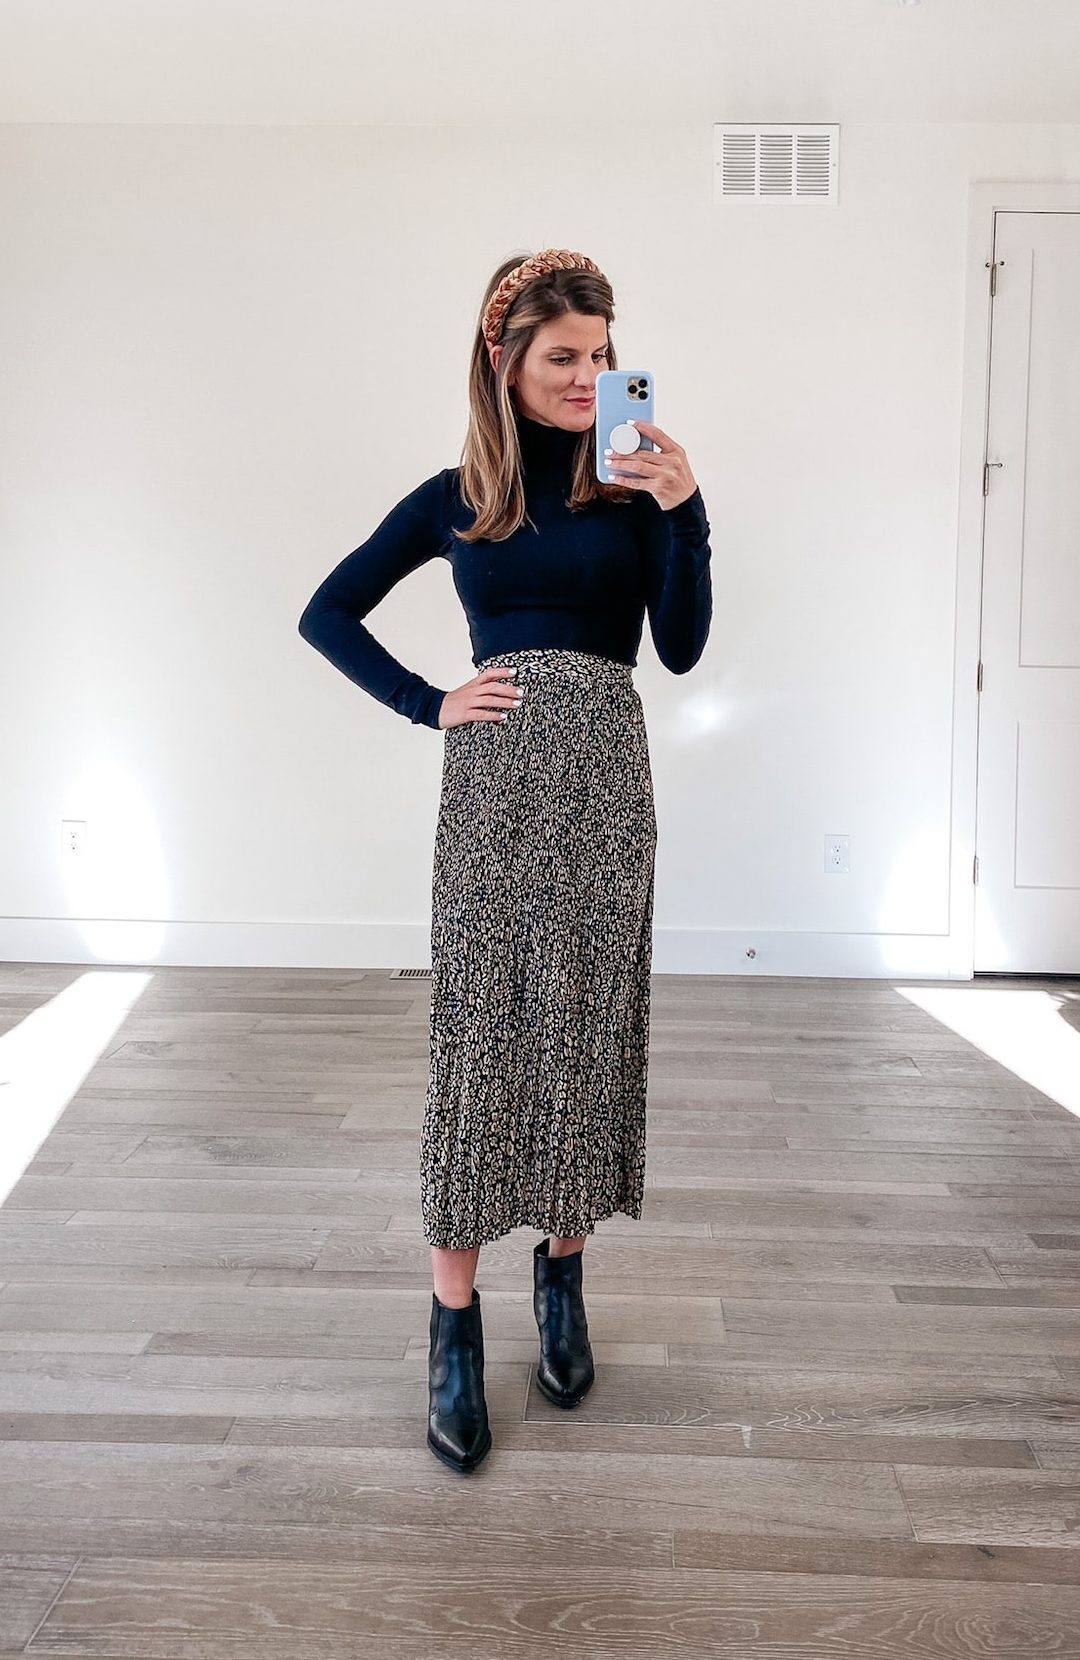 how to style a black turtleneck outfit, midi skirt, black booties, winter outfit, business casual look